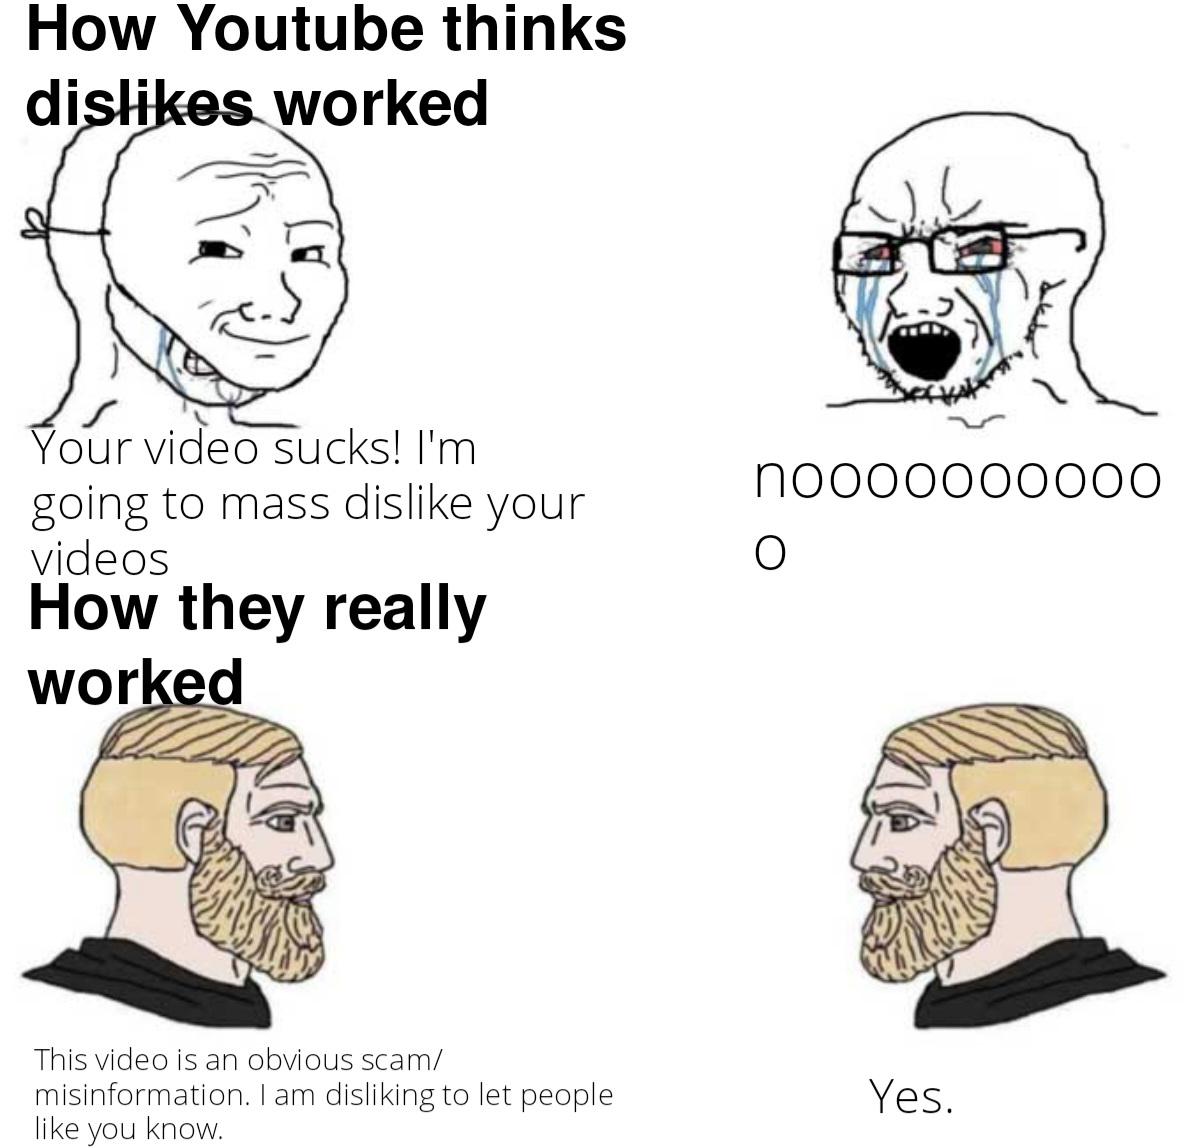 Gaming memes - cartoon - How Youtube thinks dis worked Your video sucks! I'm going to mass dis your videos How they really worked This video is an obvious scam misinformation. I am disliking to let people you know.